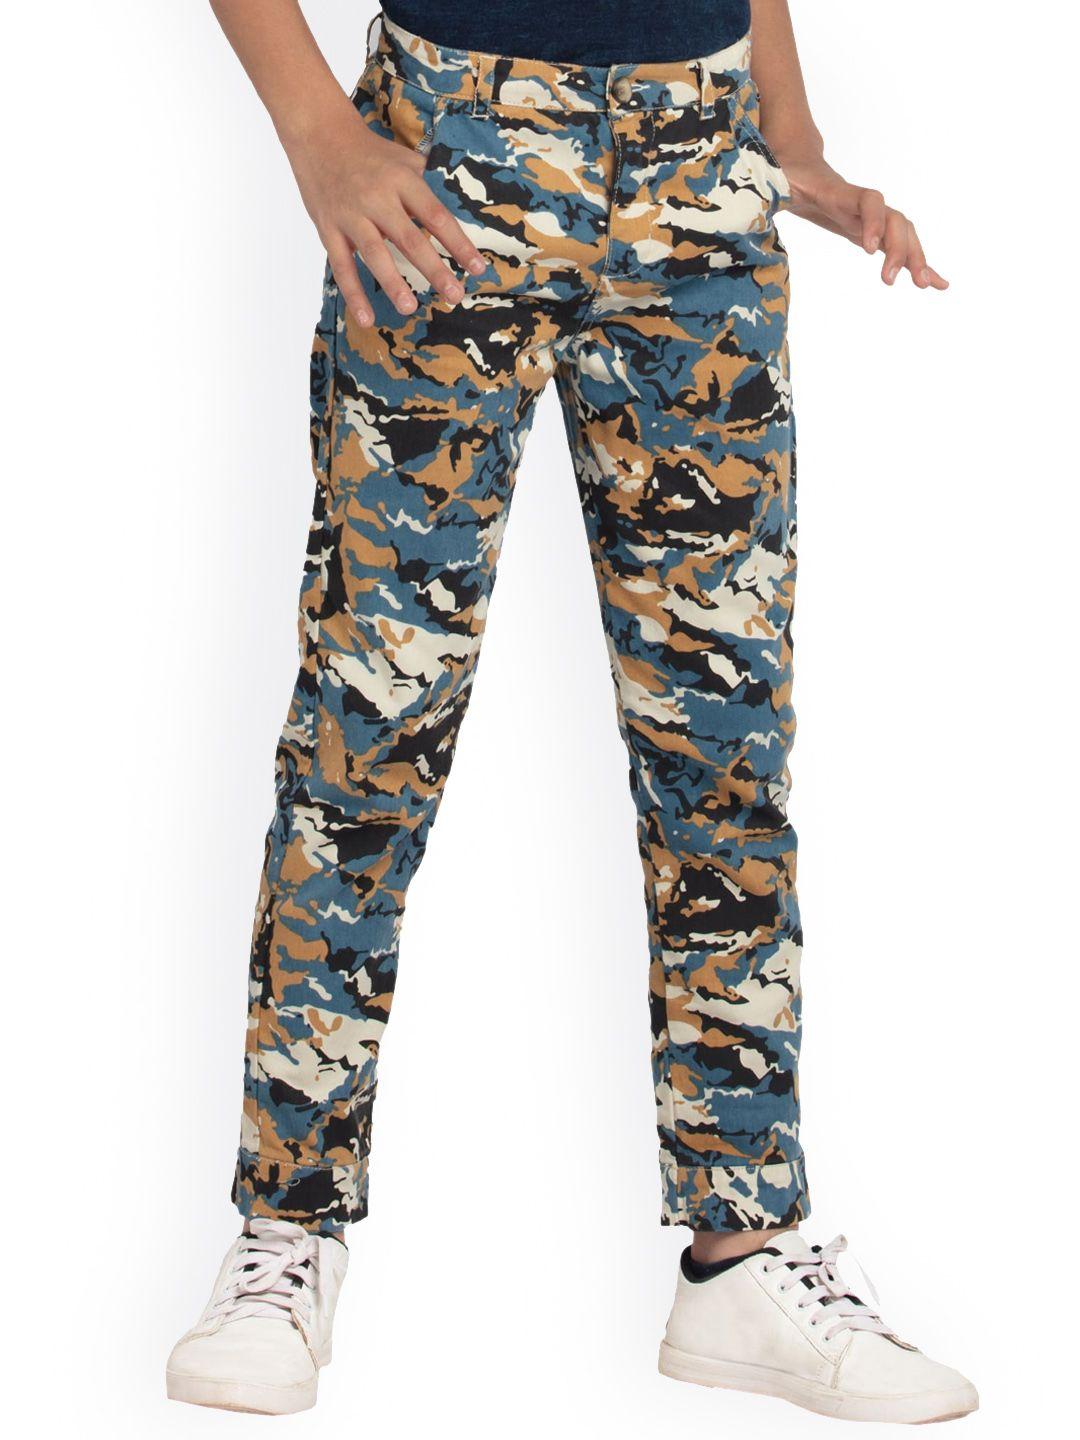 under-fourteen-only-boys-cream-camouflage-printed-trousers